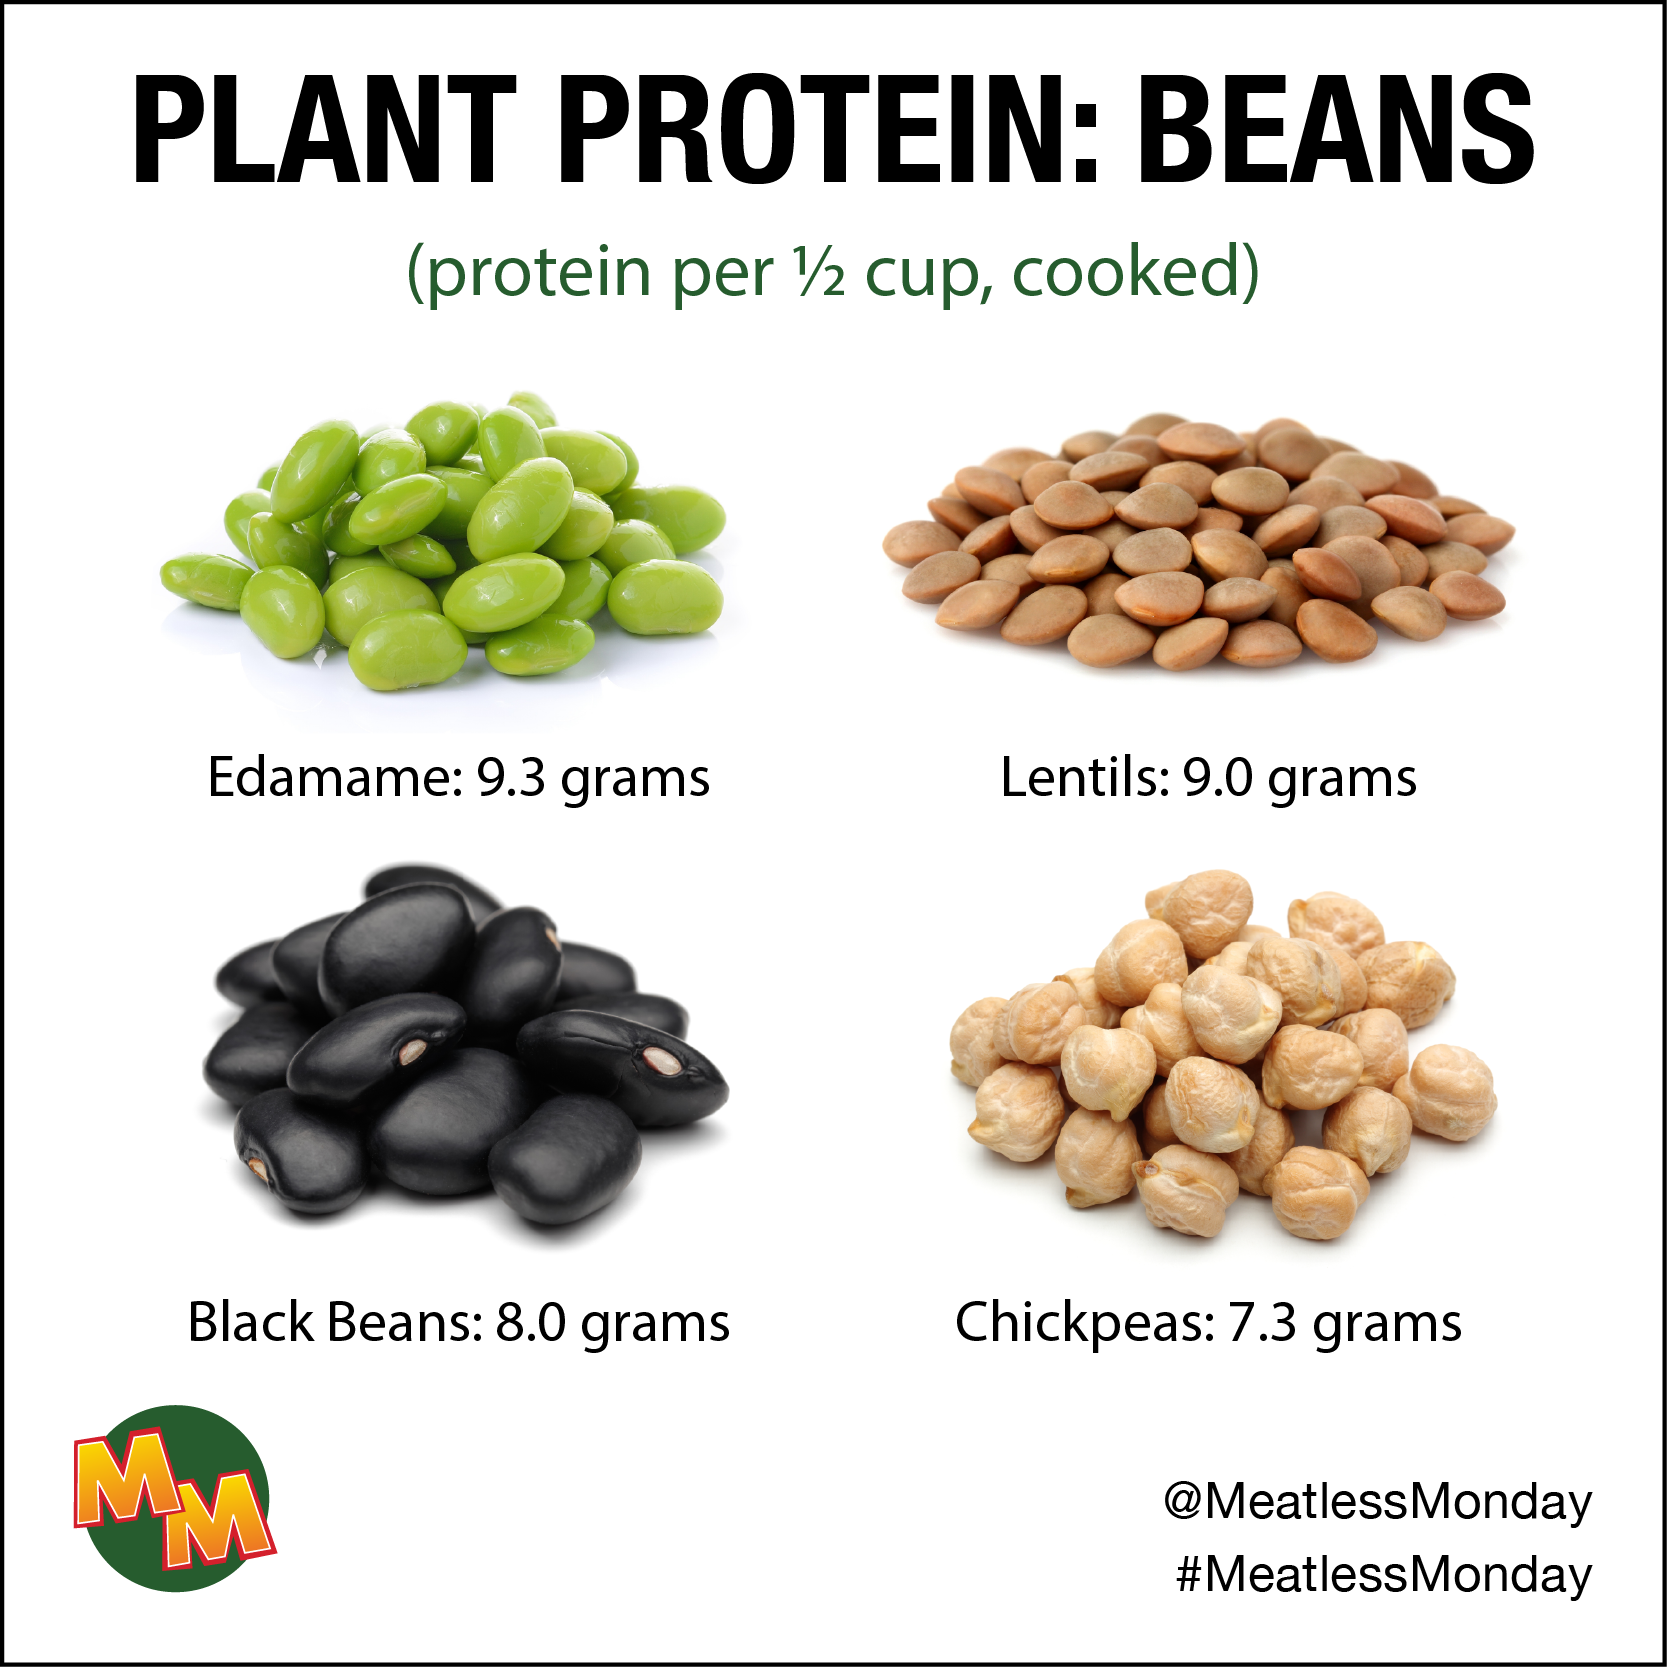 Plant protein: beans